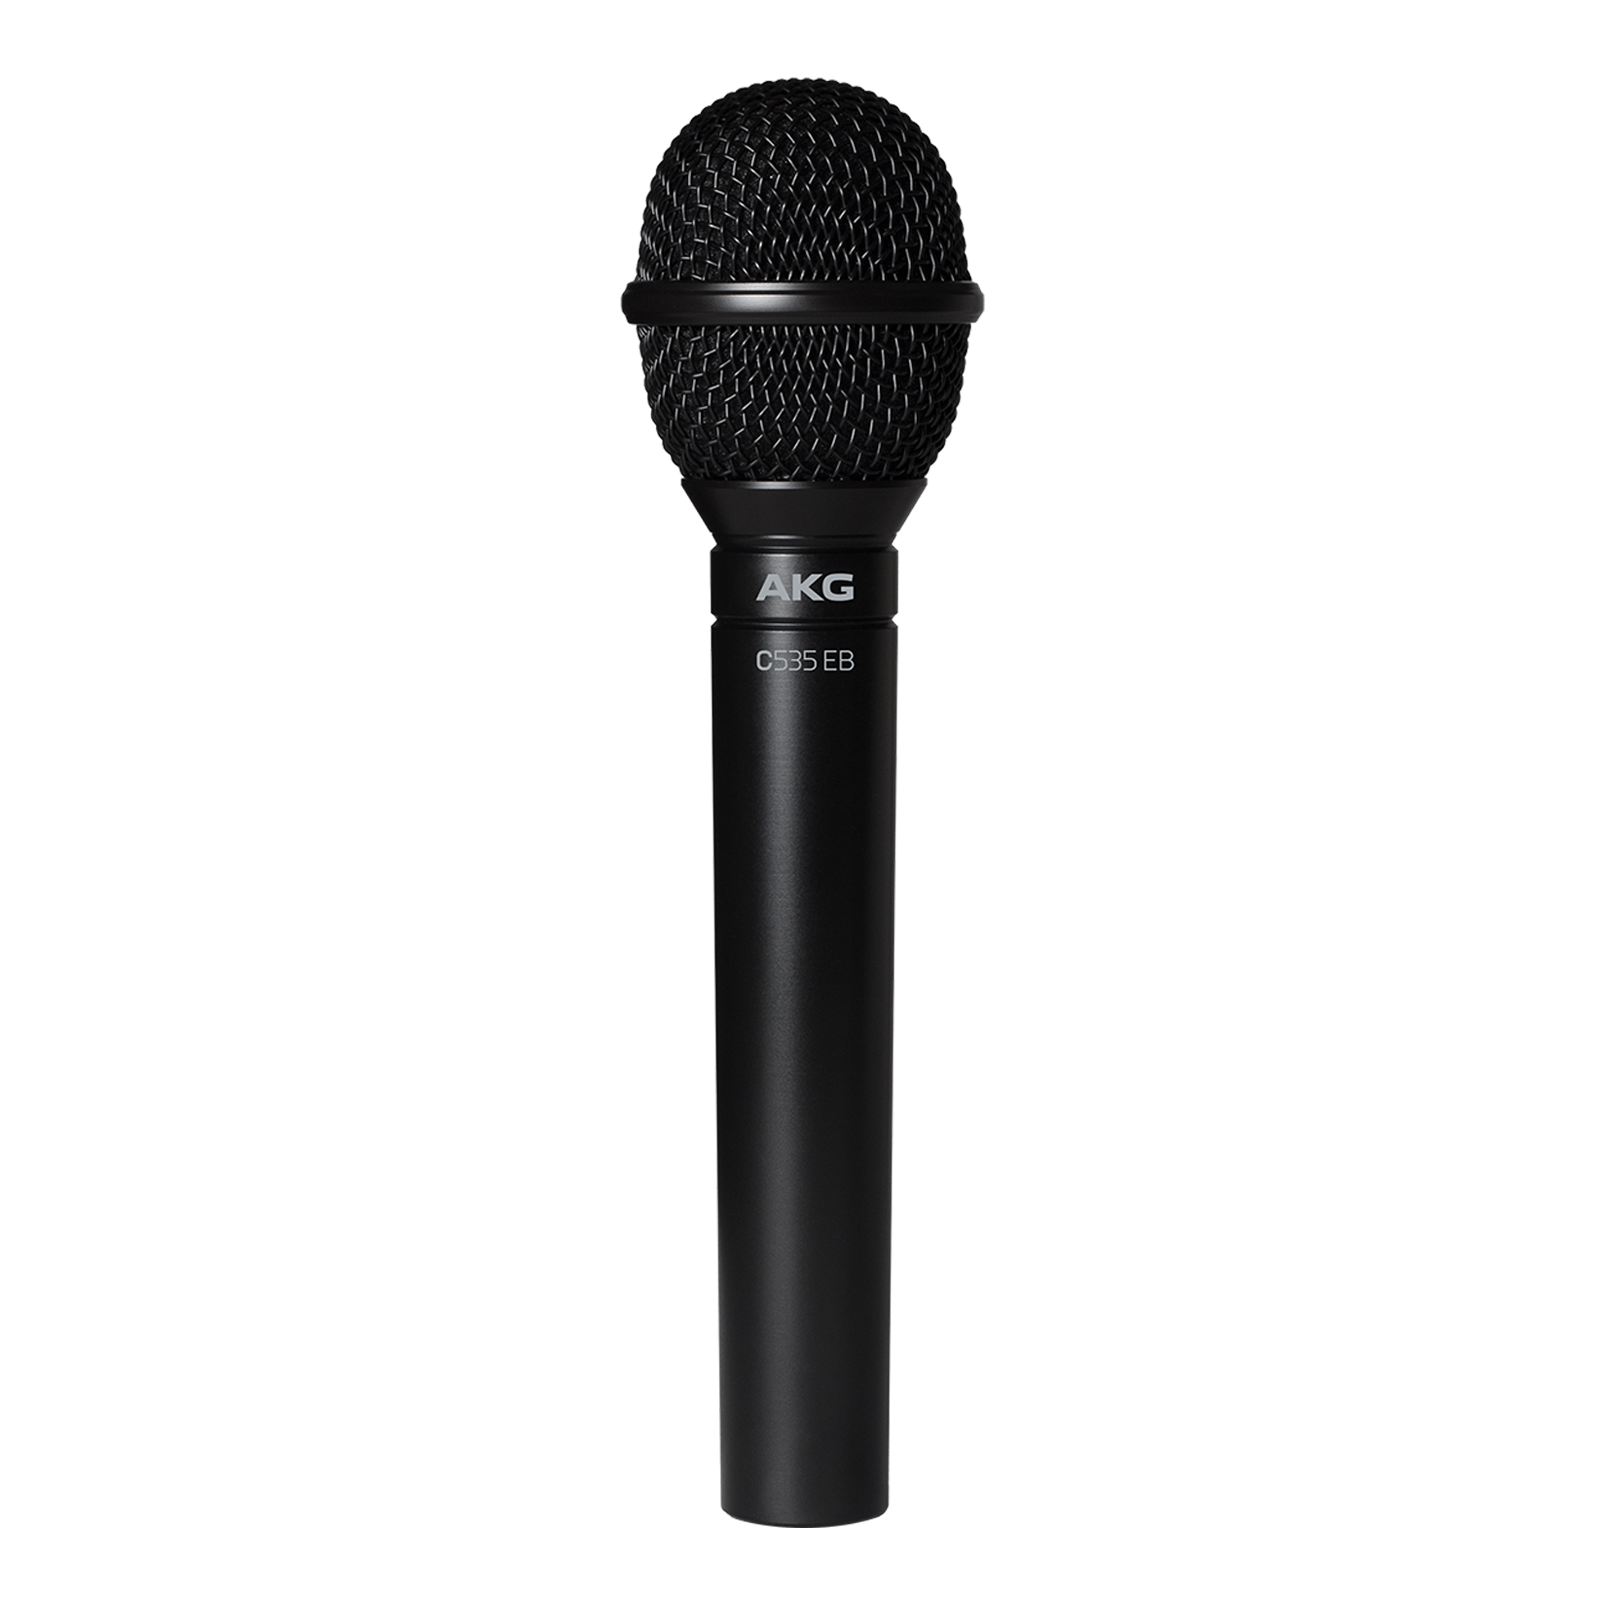 C535 EB (discontinued) - Black - Reference condenser vocal microphone - Hero